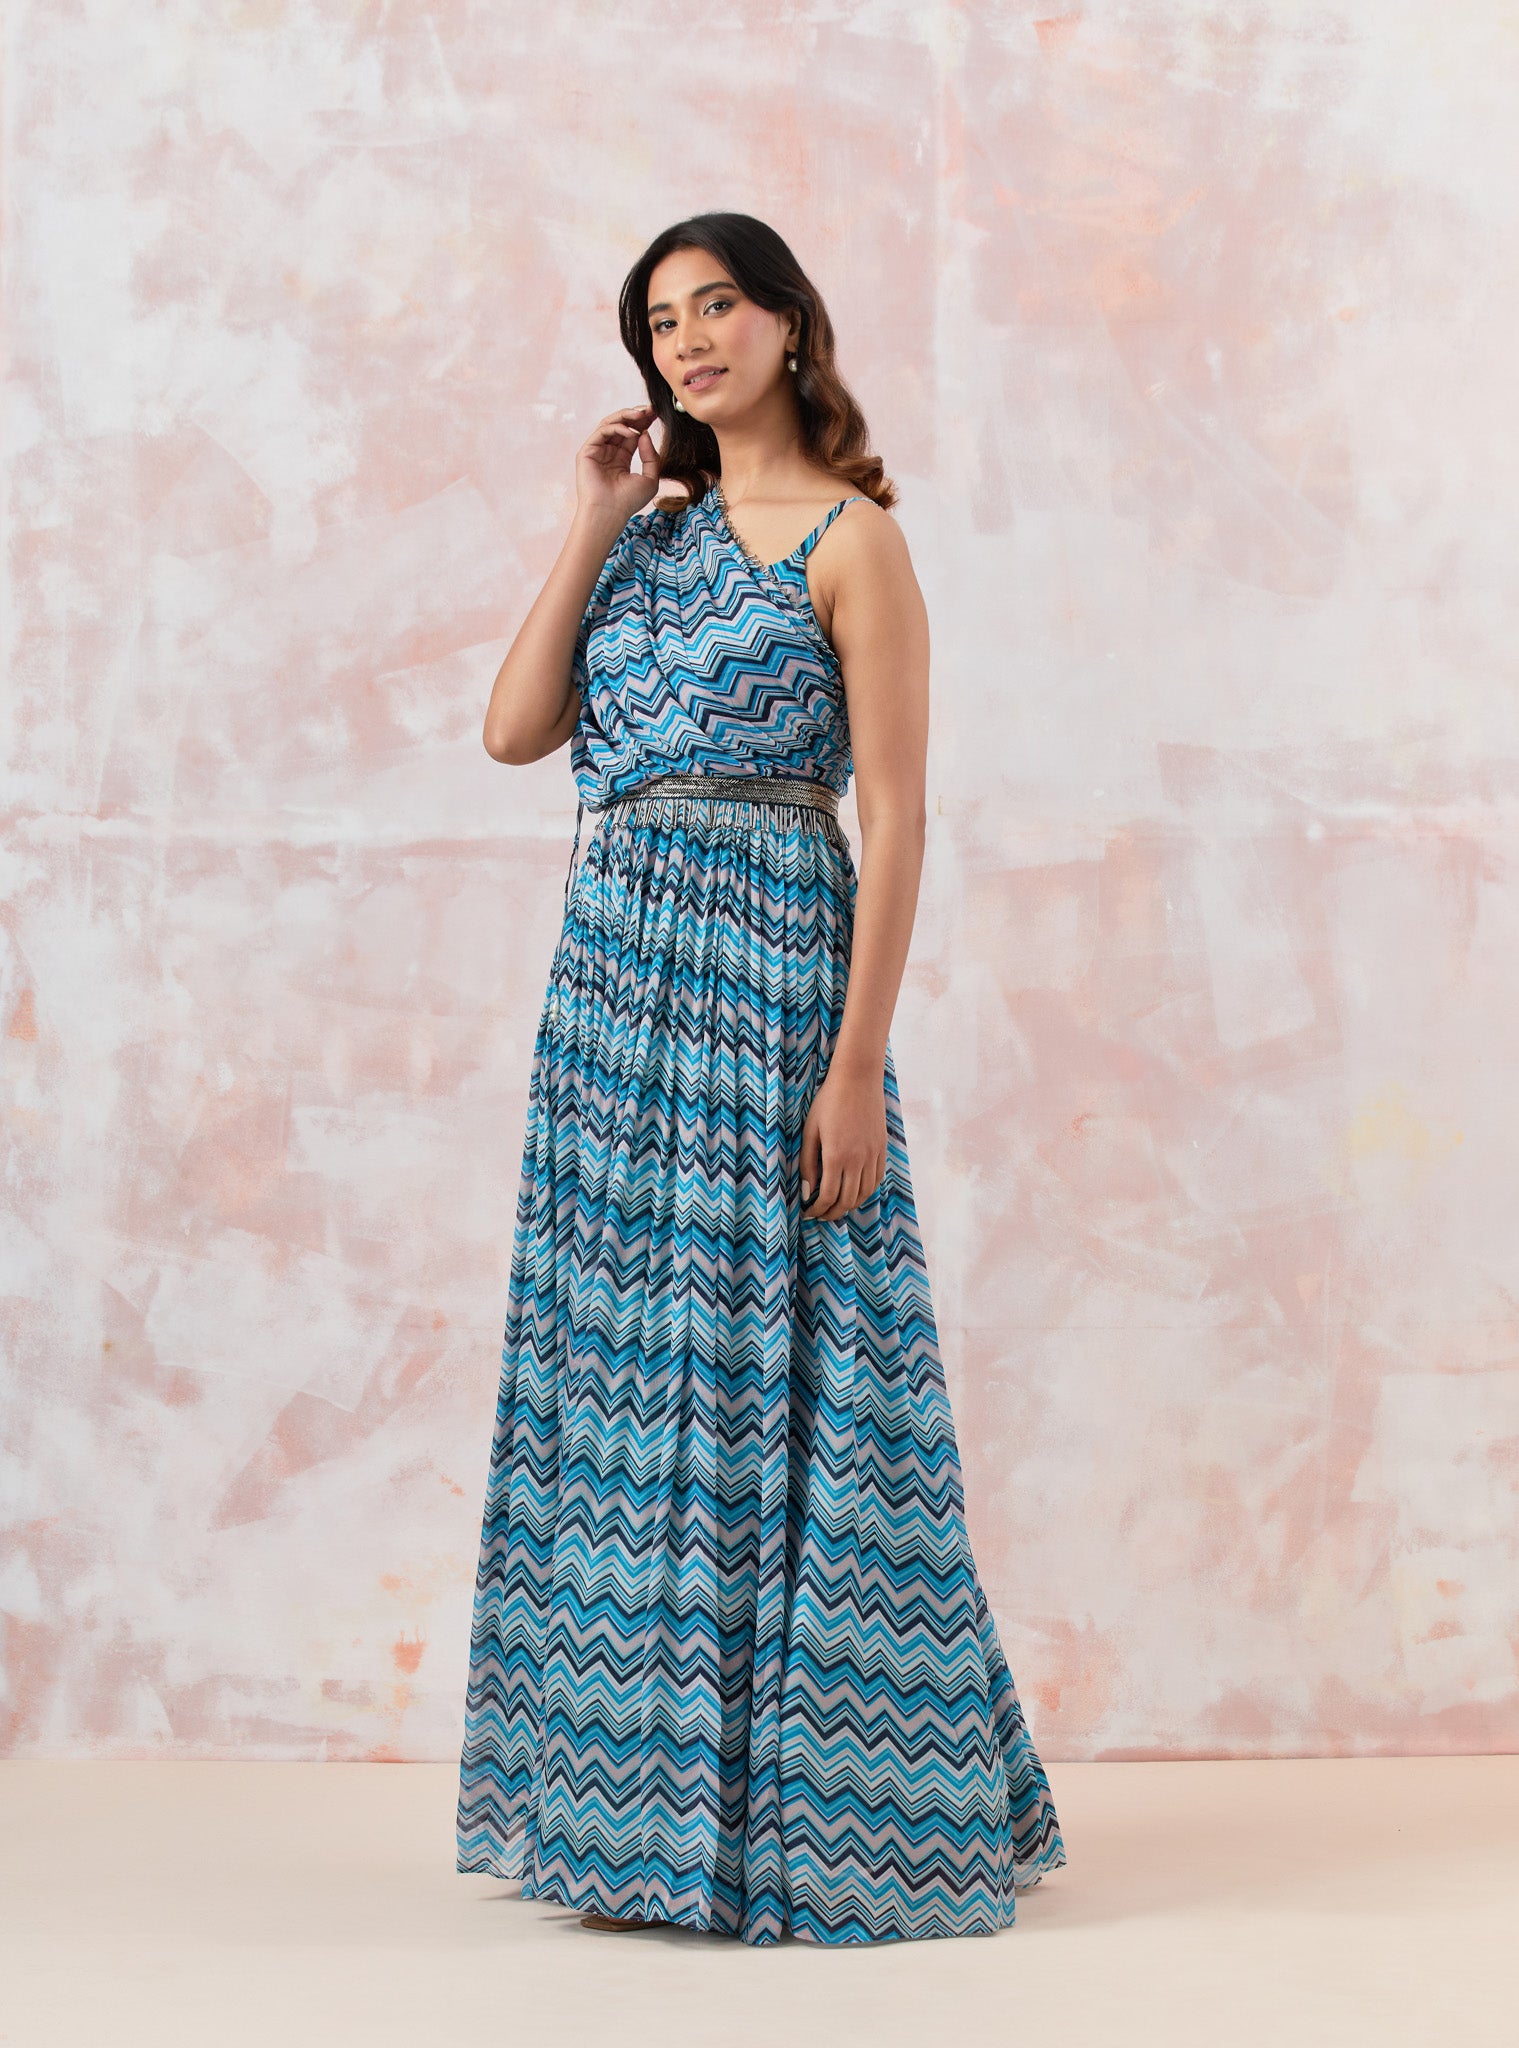 Buy a Blue stylish gown dress crafted in the softest Chinon fabric. the draped neckline brings in glamour. Dazzle on weddings and special occasions with exquisite Indian designer dresses, sharara suits, Anarkali suits, and wedding lehengas from Pure Elegance Indian fashion store in the USA.